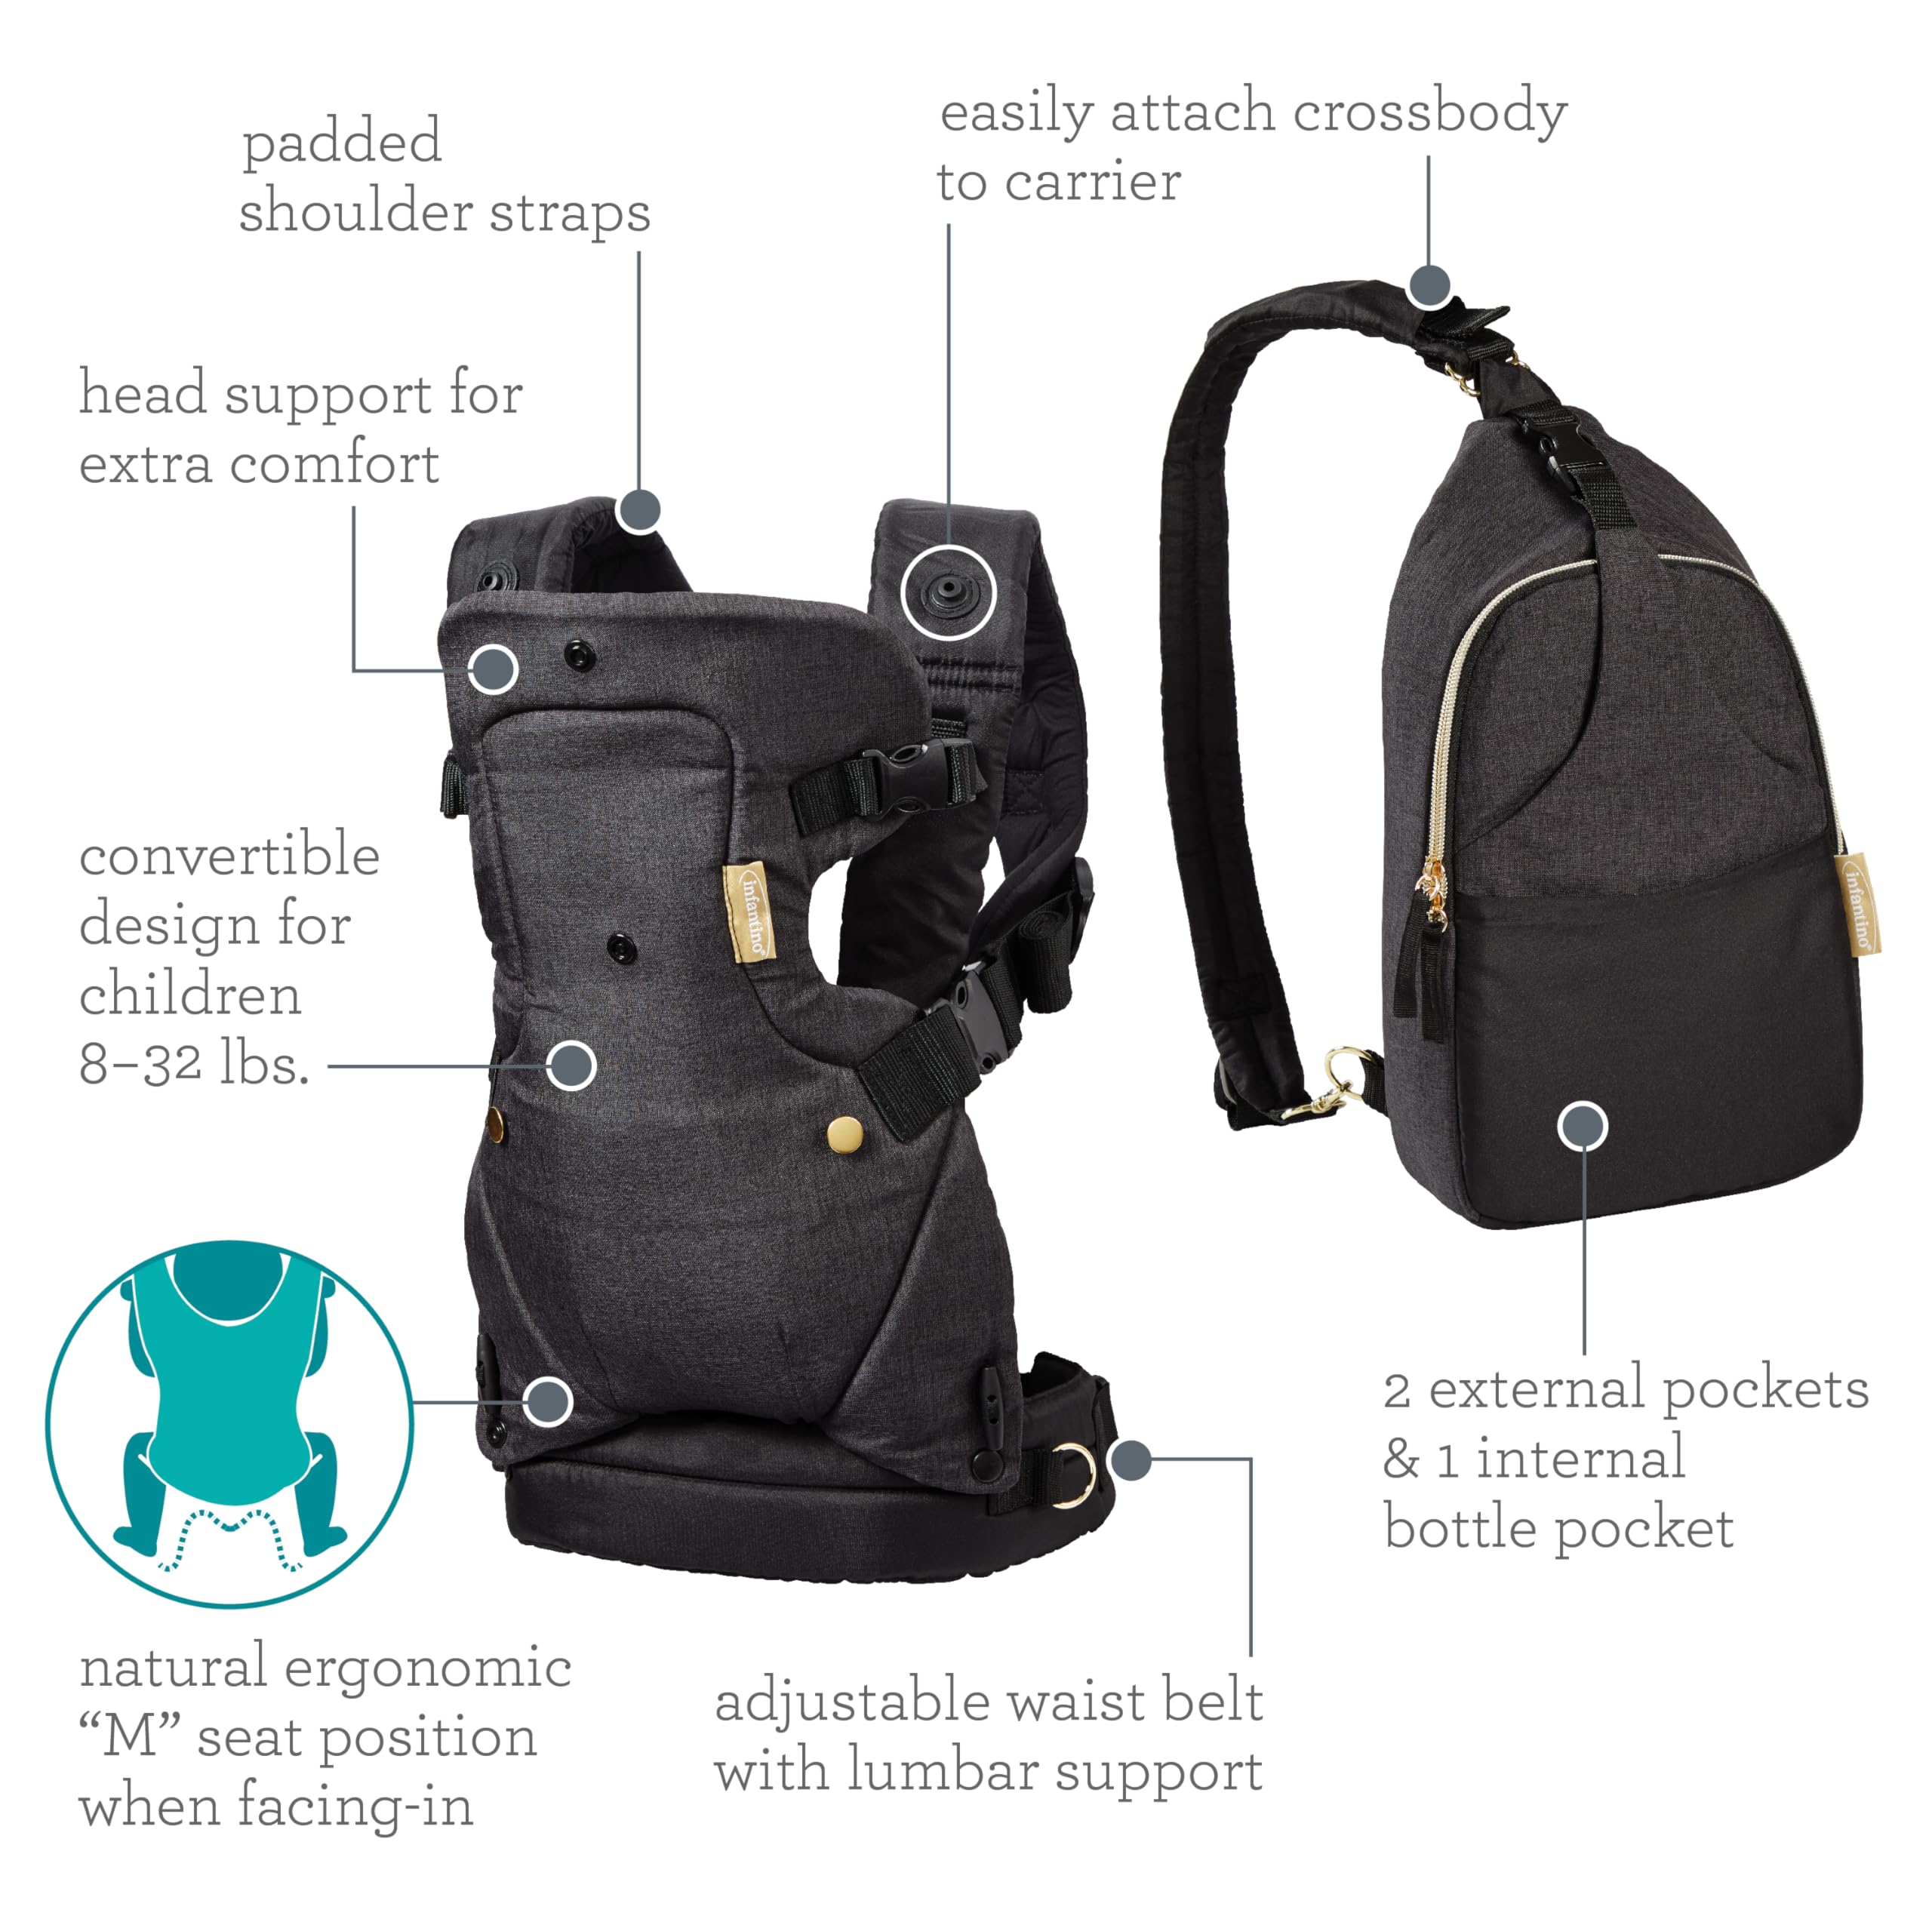 The Infantino Flip 4-in-1 Convertible Baby Carrier & Crossbody Diaper Bag - Grow-with-Me Carrier with Attachable Crossbody Diaper Bag, Black and Gold, 2-Piece Set